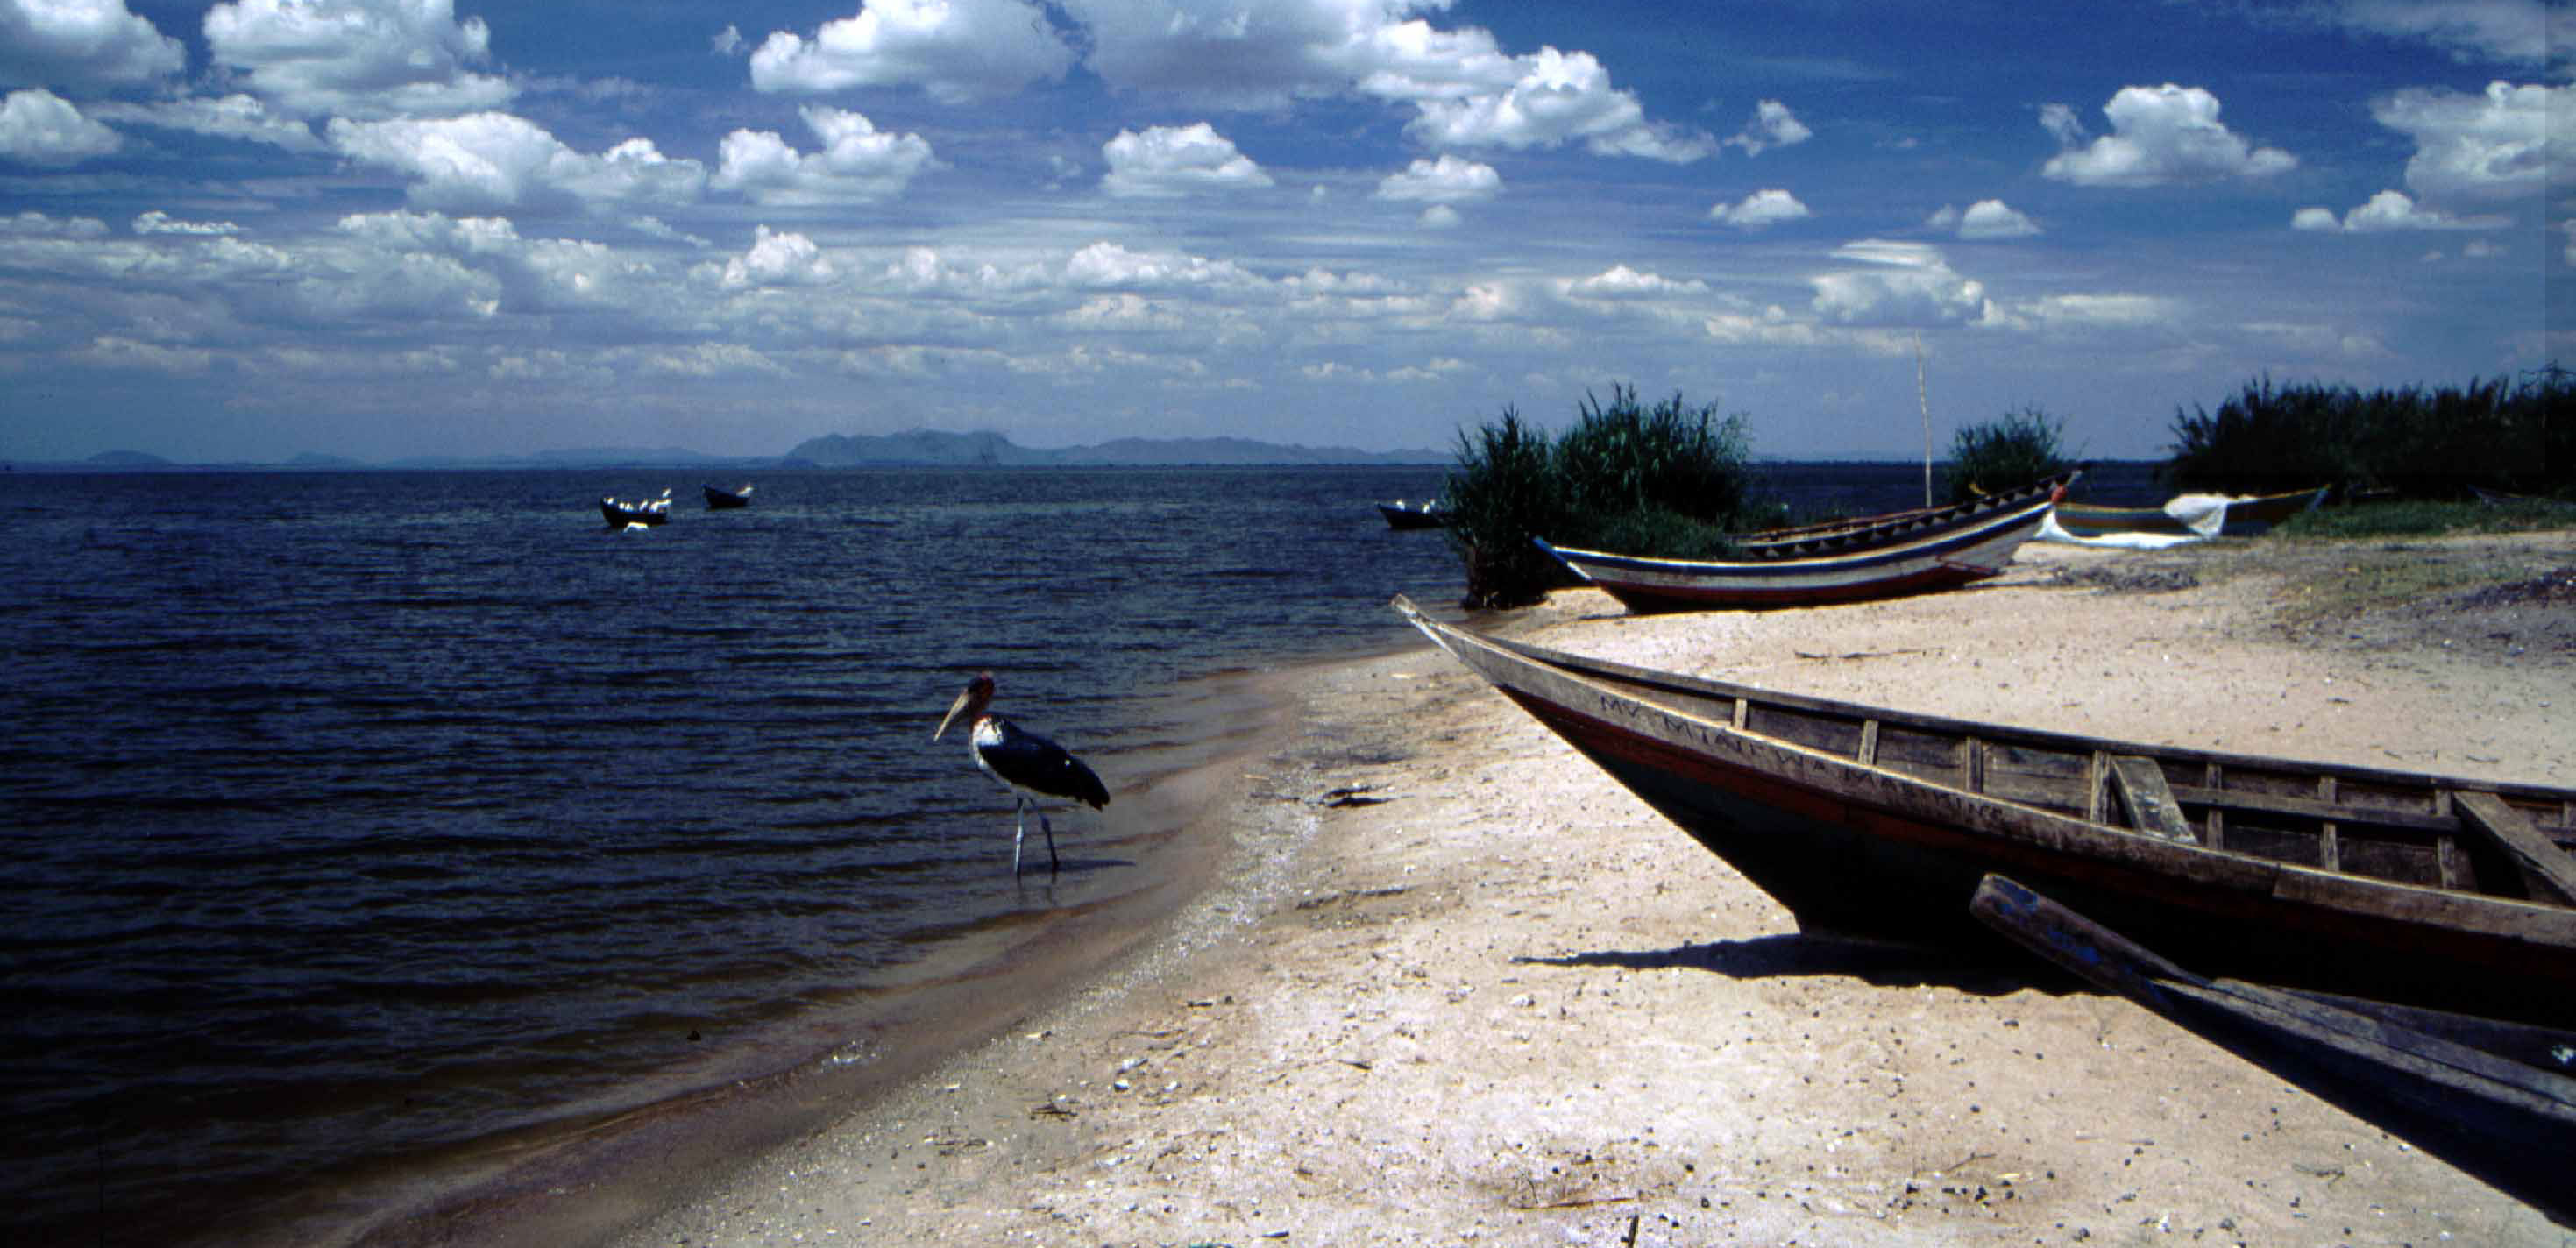 A photo of the Shores of Lake Victoria